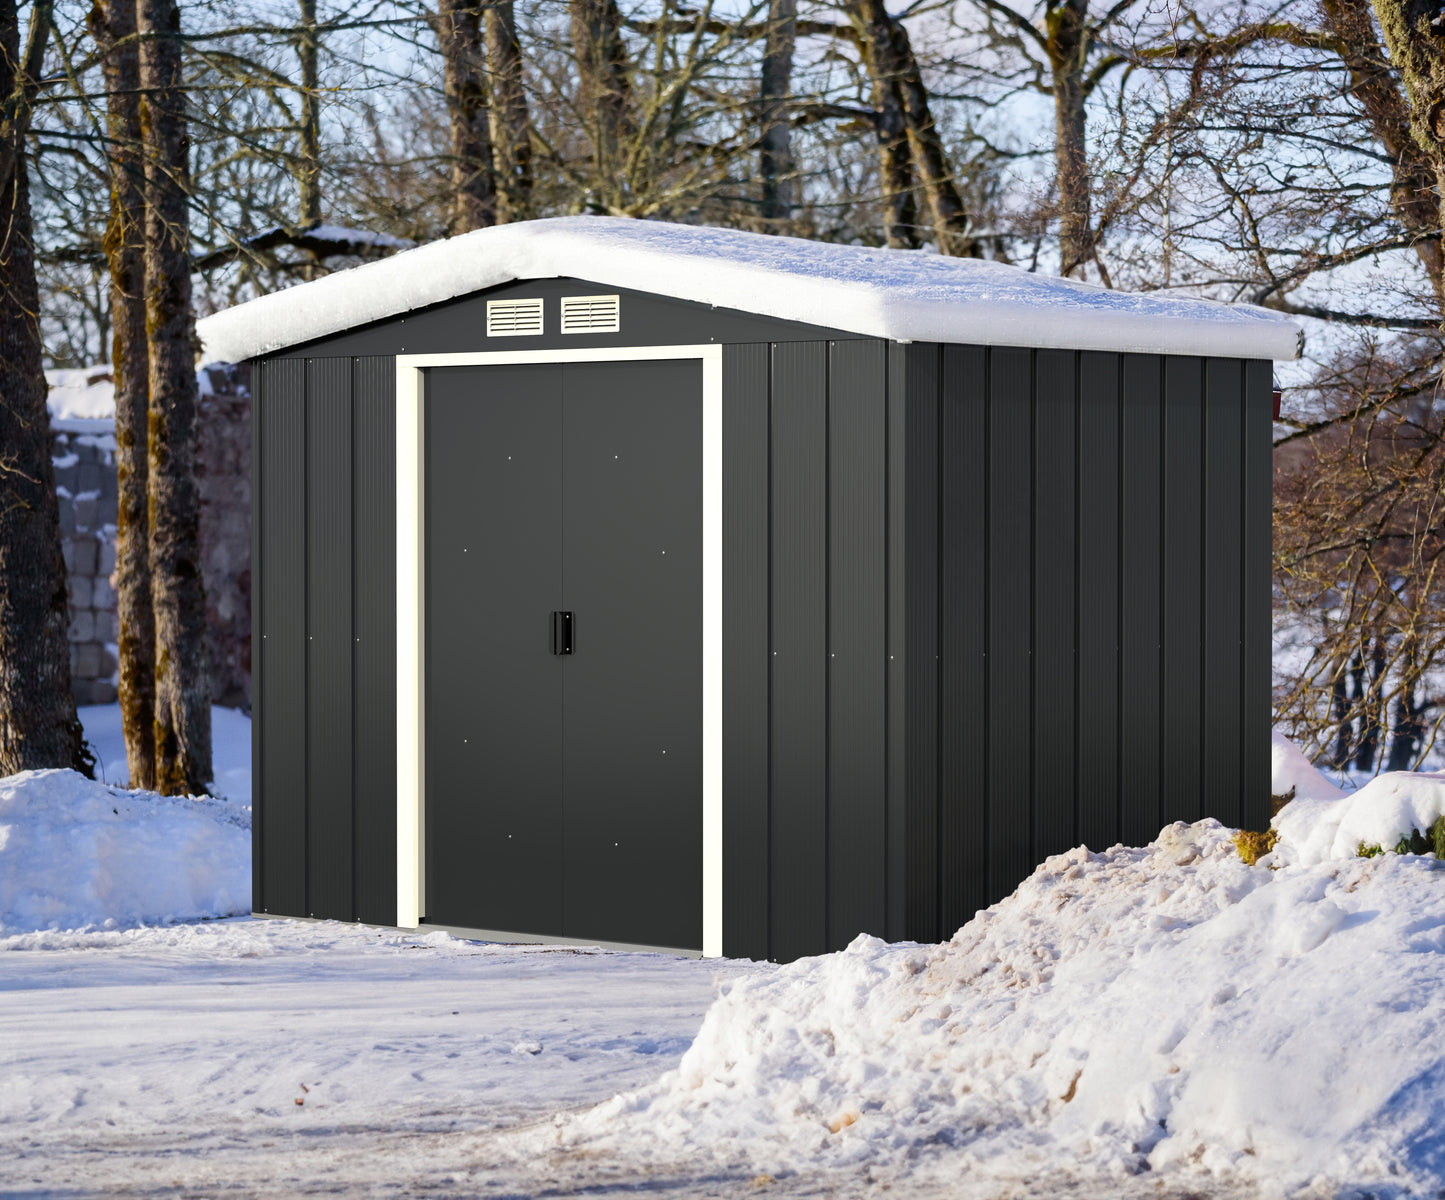 Duramax ECO 2.52 x 1.74 m Metal Shed - Anthracite